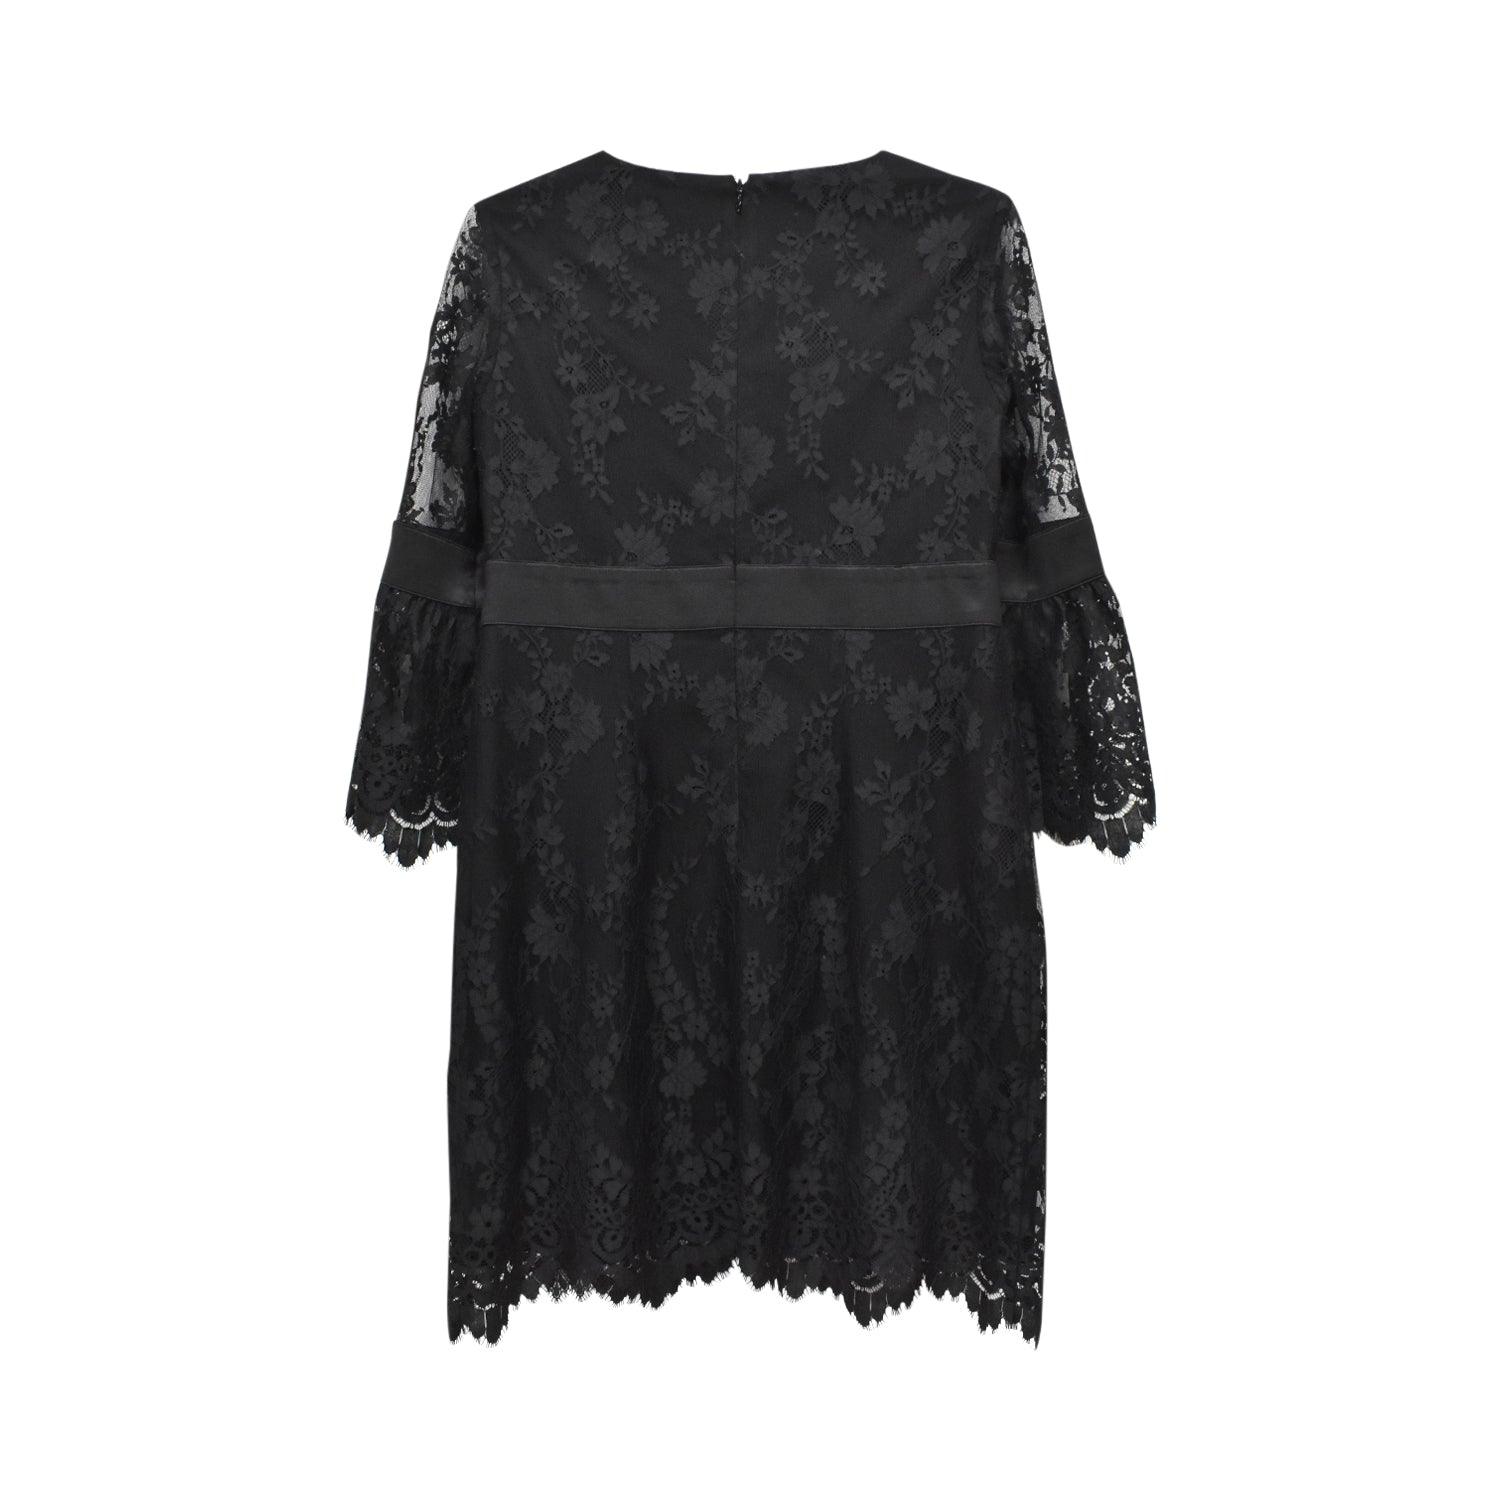 Christian Dior Dress - Women's 36 - Fashionably Yours